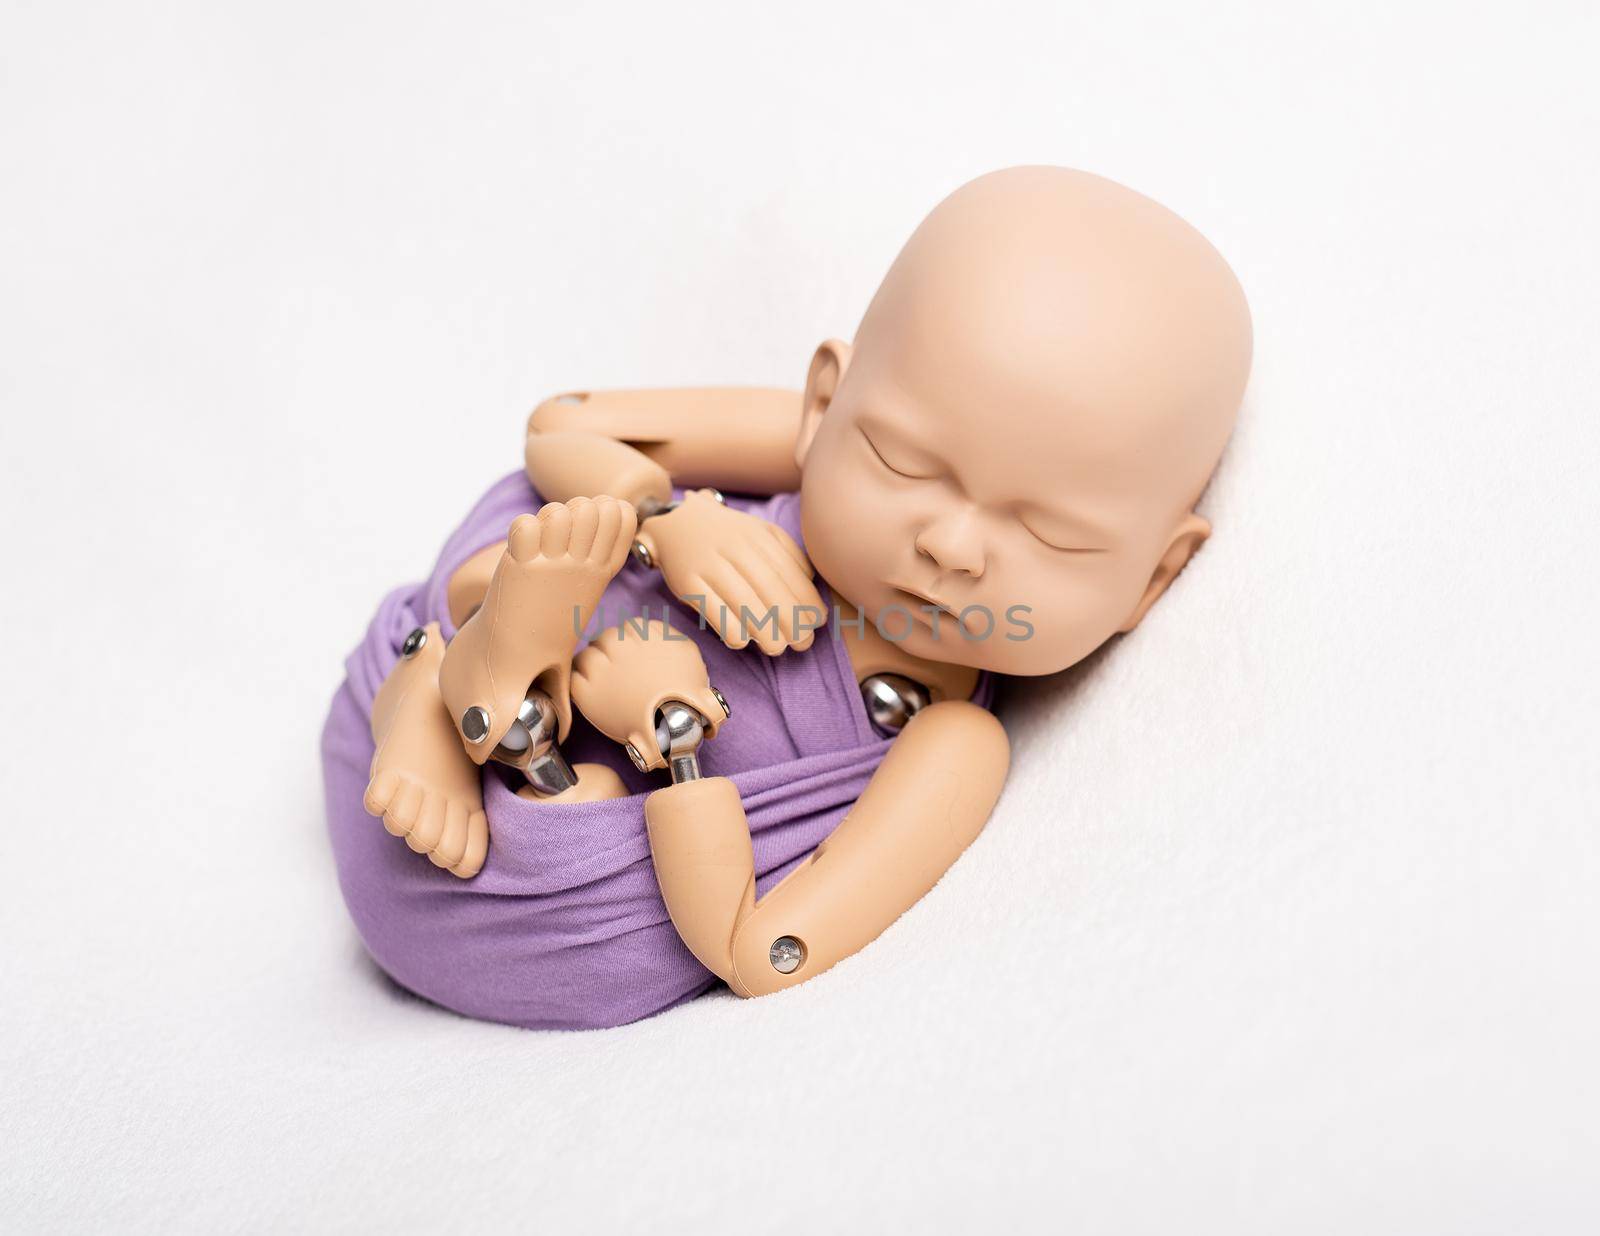 Beatiful doll of newborn kid in pouch sling for professional photo, on white background